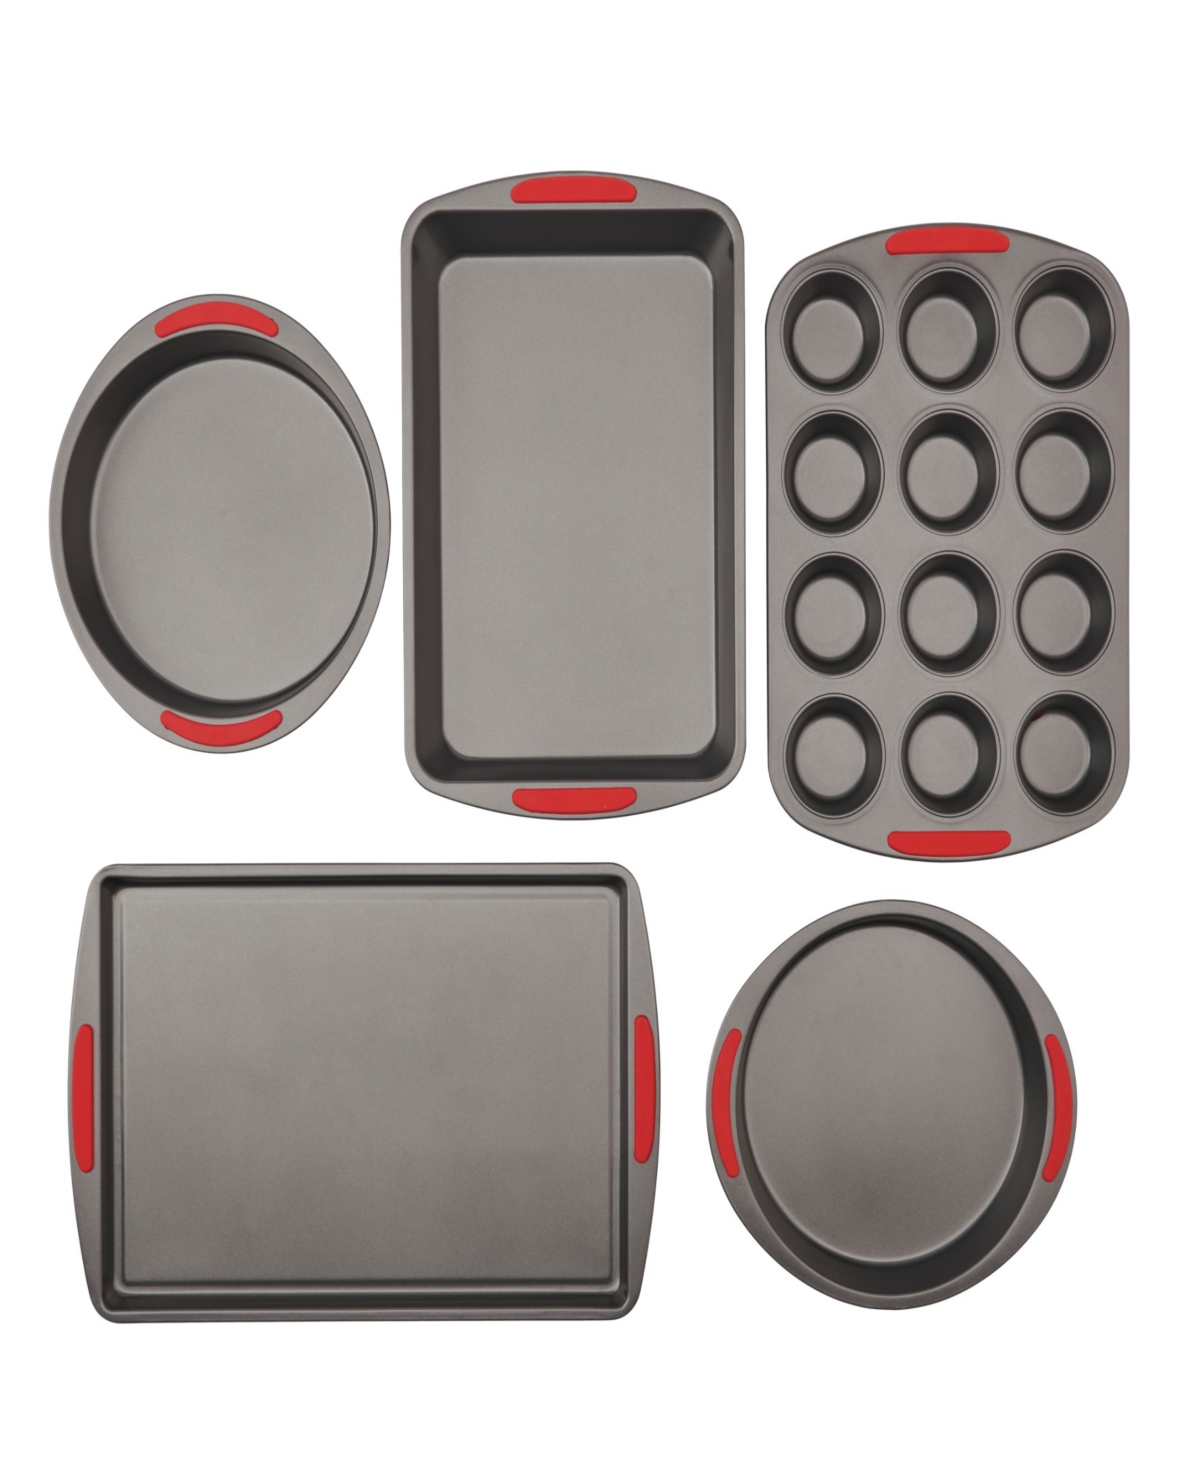 Good Cook Mega Grip 5 Piece Nonstick Steel Bakeware Set With Cookie Sheet, Roast Pan, 2 Cake Pans, And Muffin In Gray